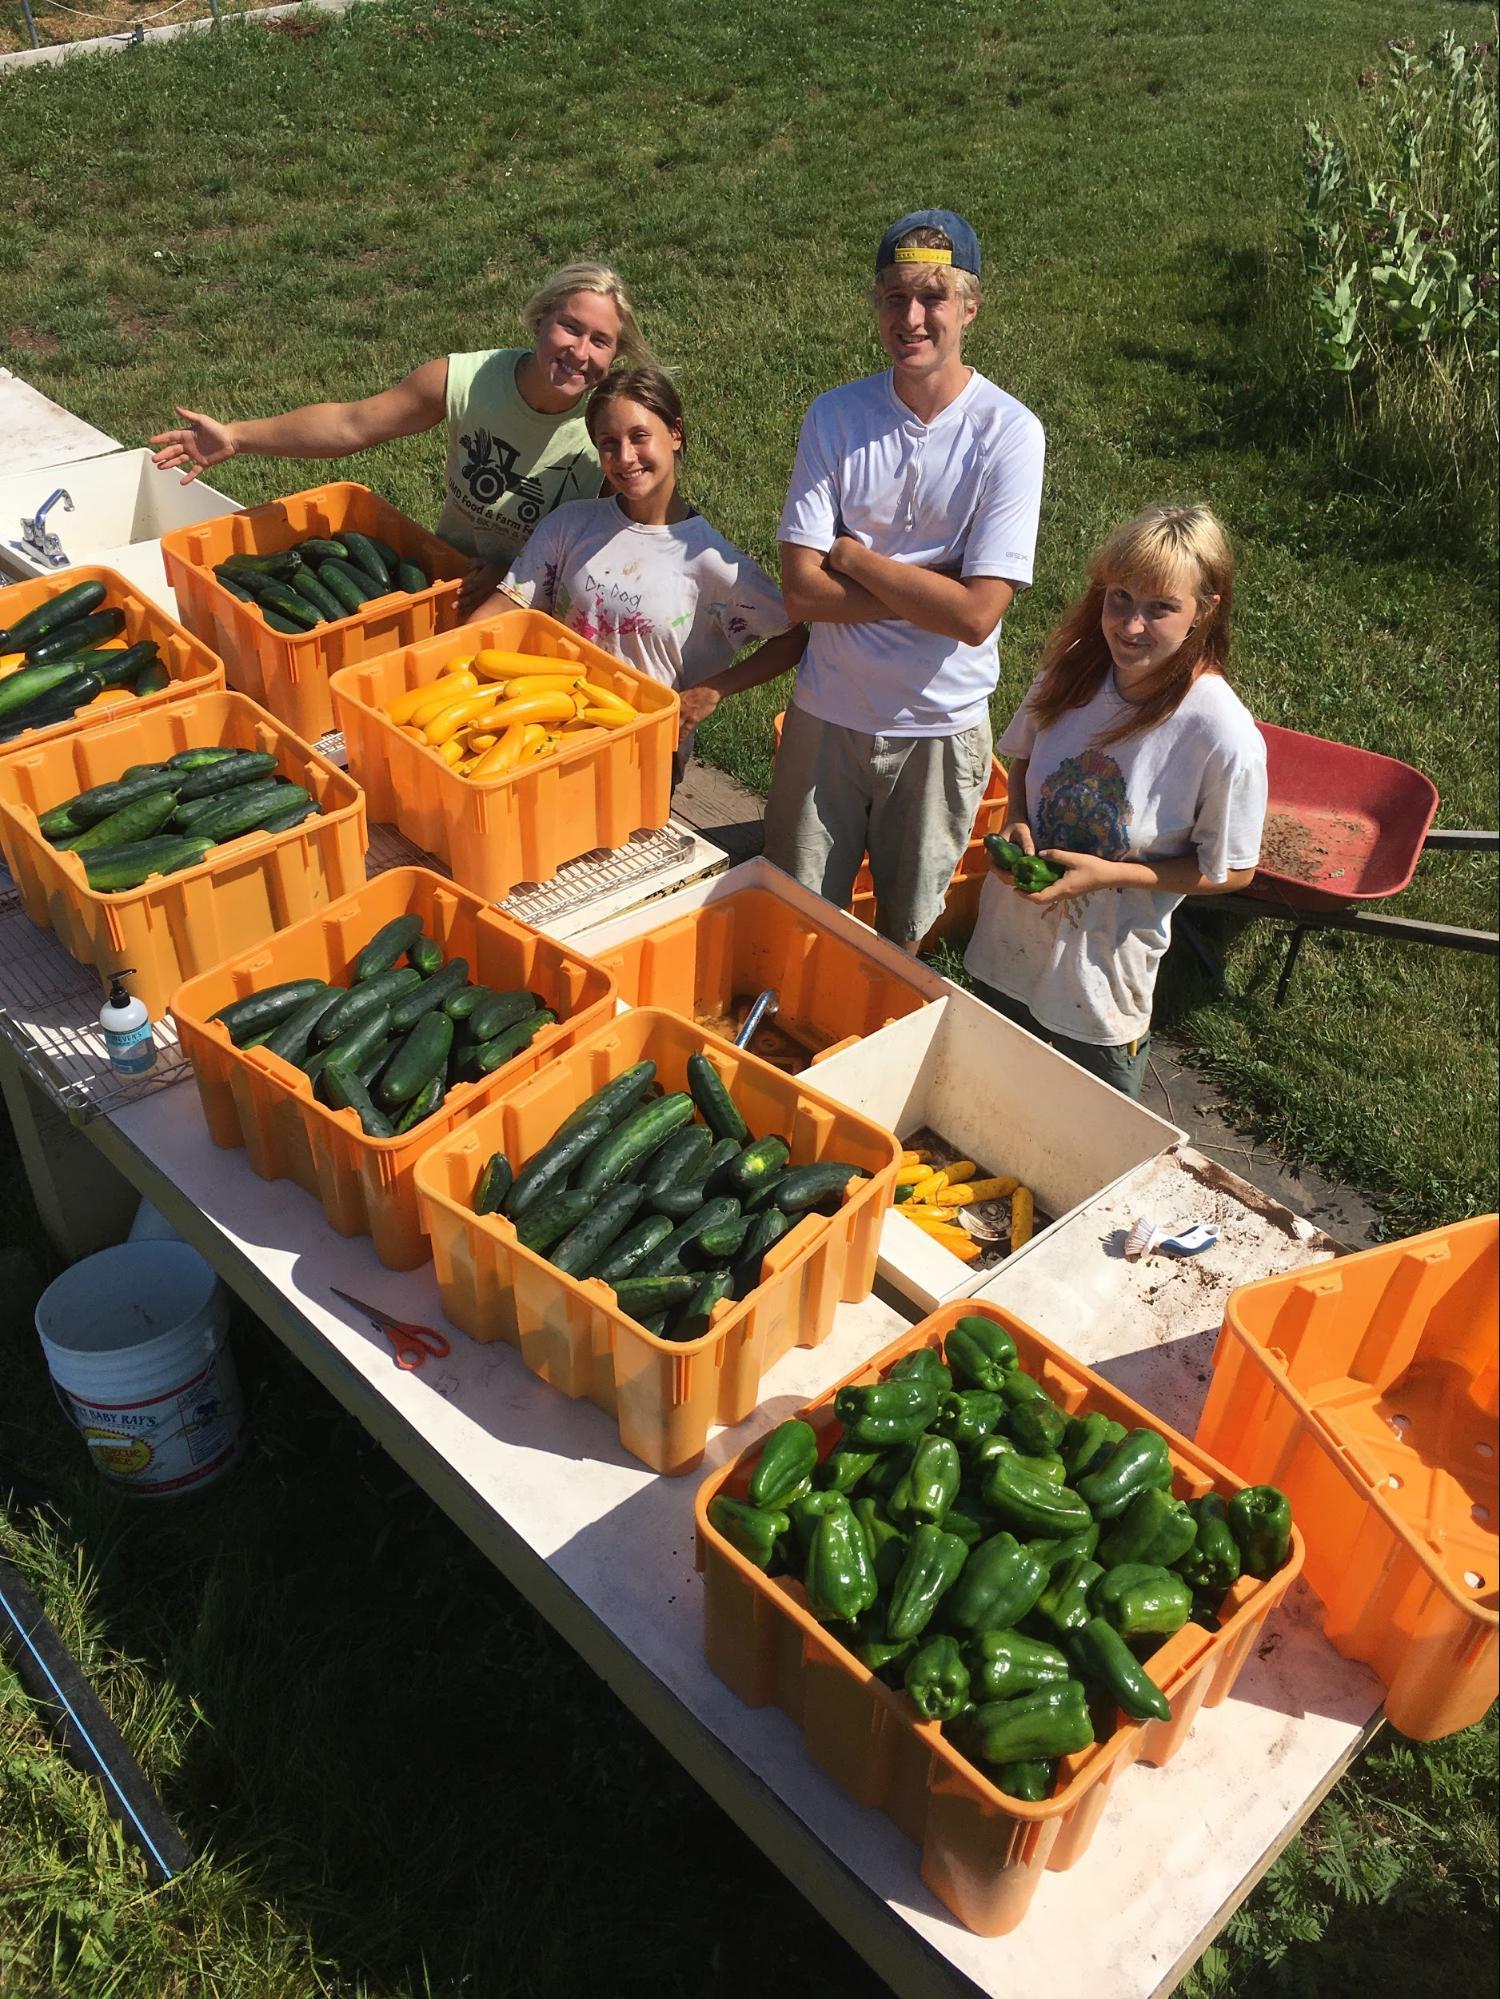 Students showing off containers of squash and zucchini on a table.